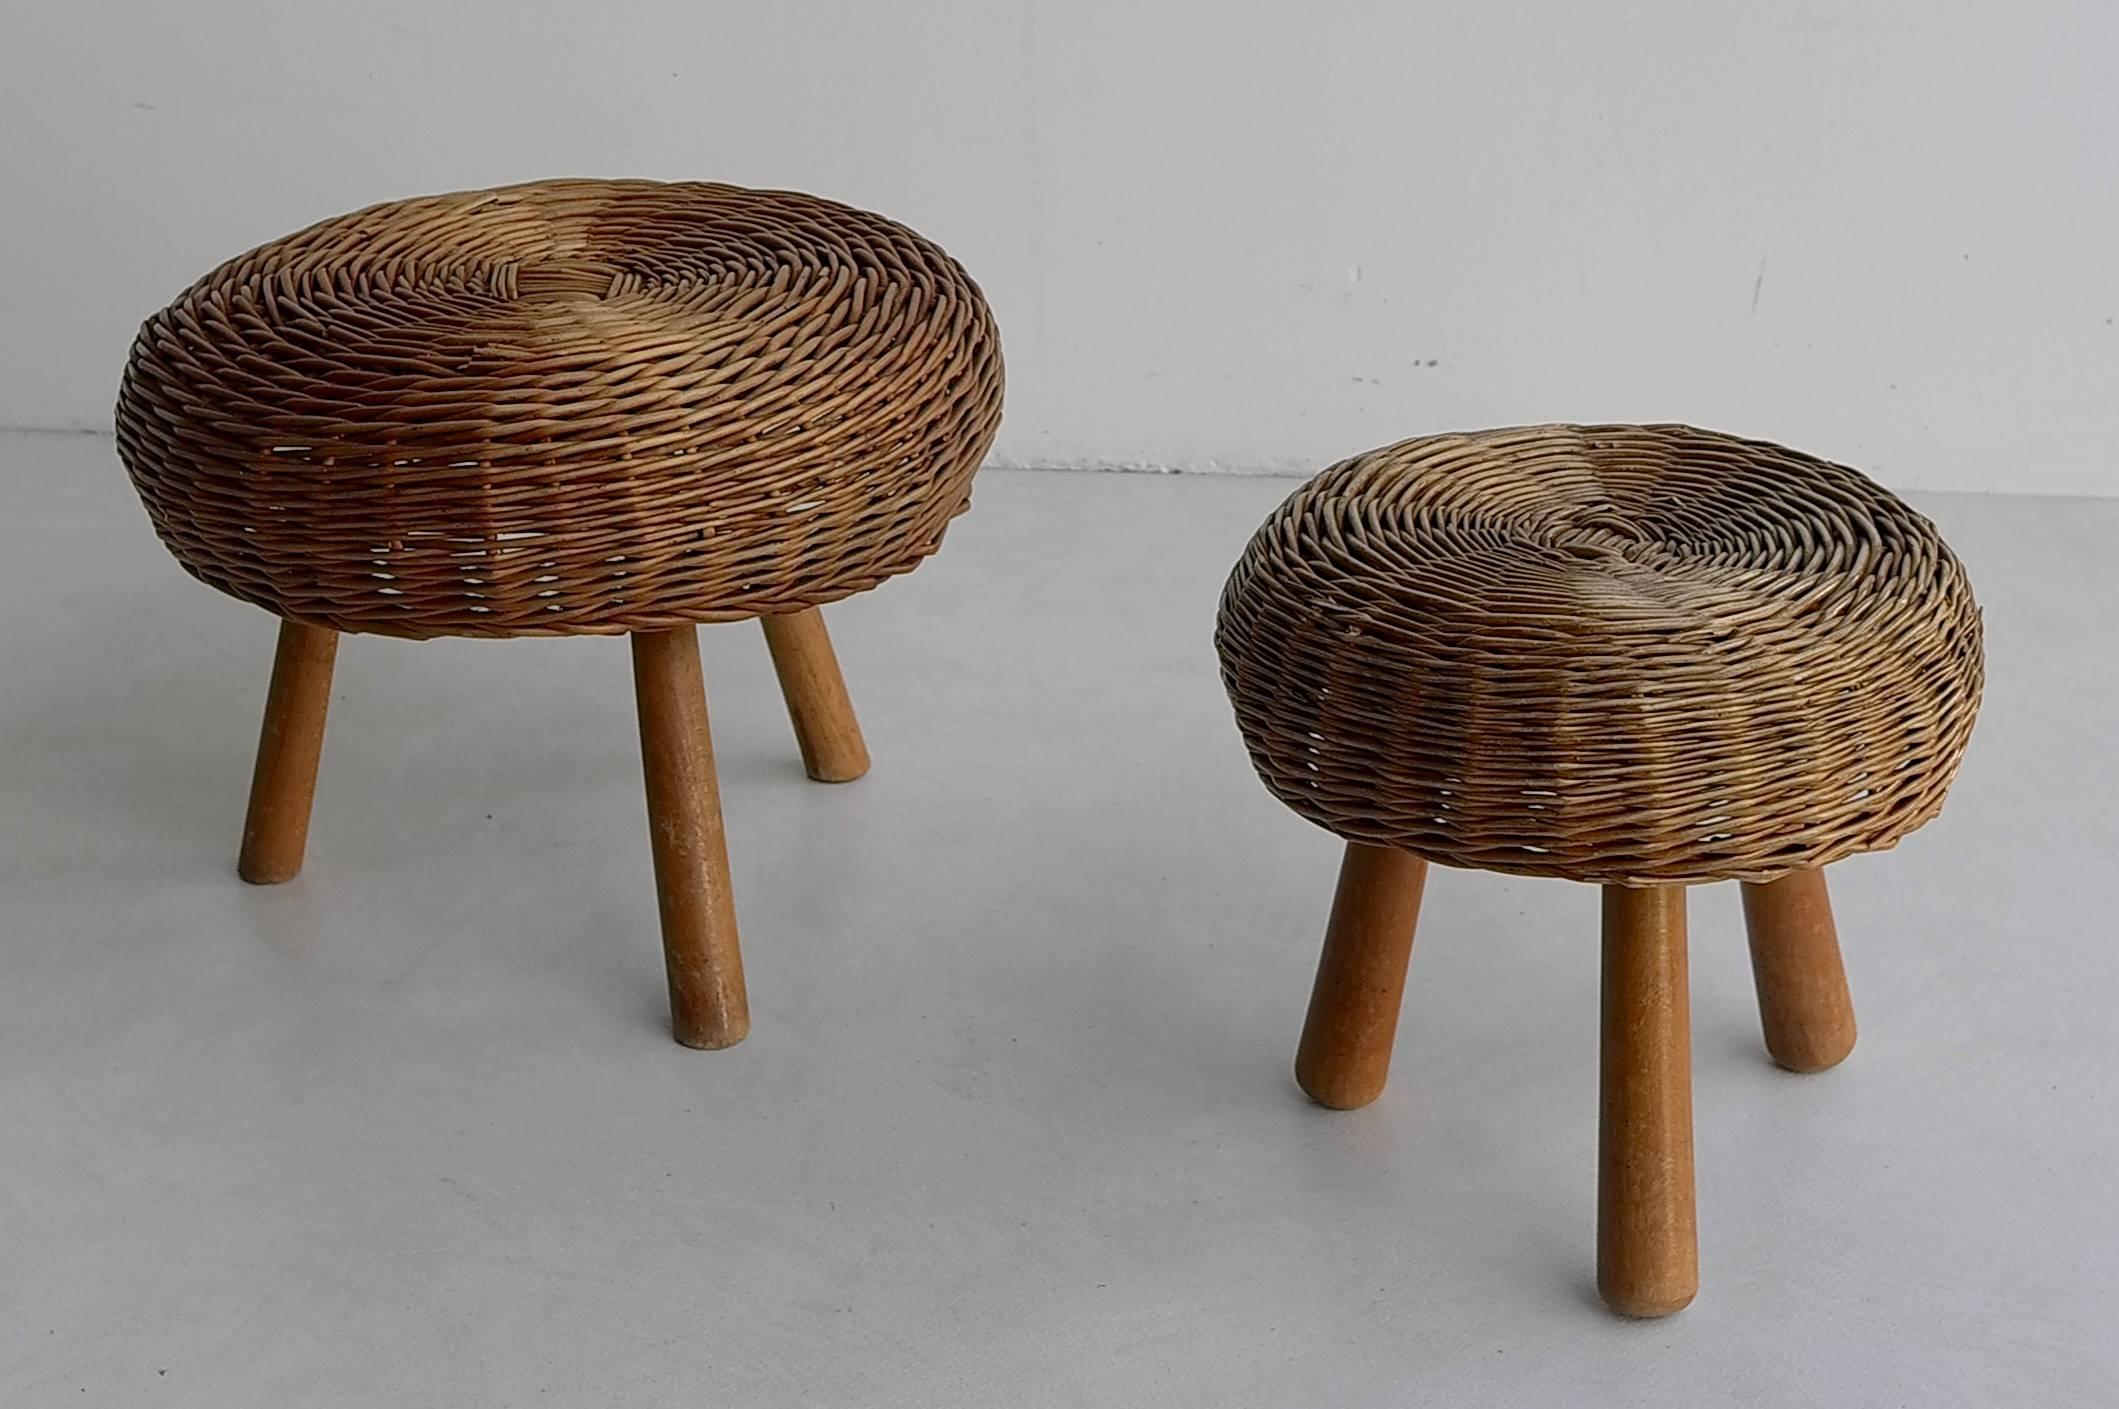 French Wicker stools in style of Charlotte Perriand.

In two sizes: 
The larger one: Height 30cm, diameter 43.
The smaler: Height 28cm, diameter 30cm.